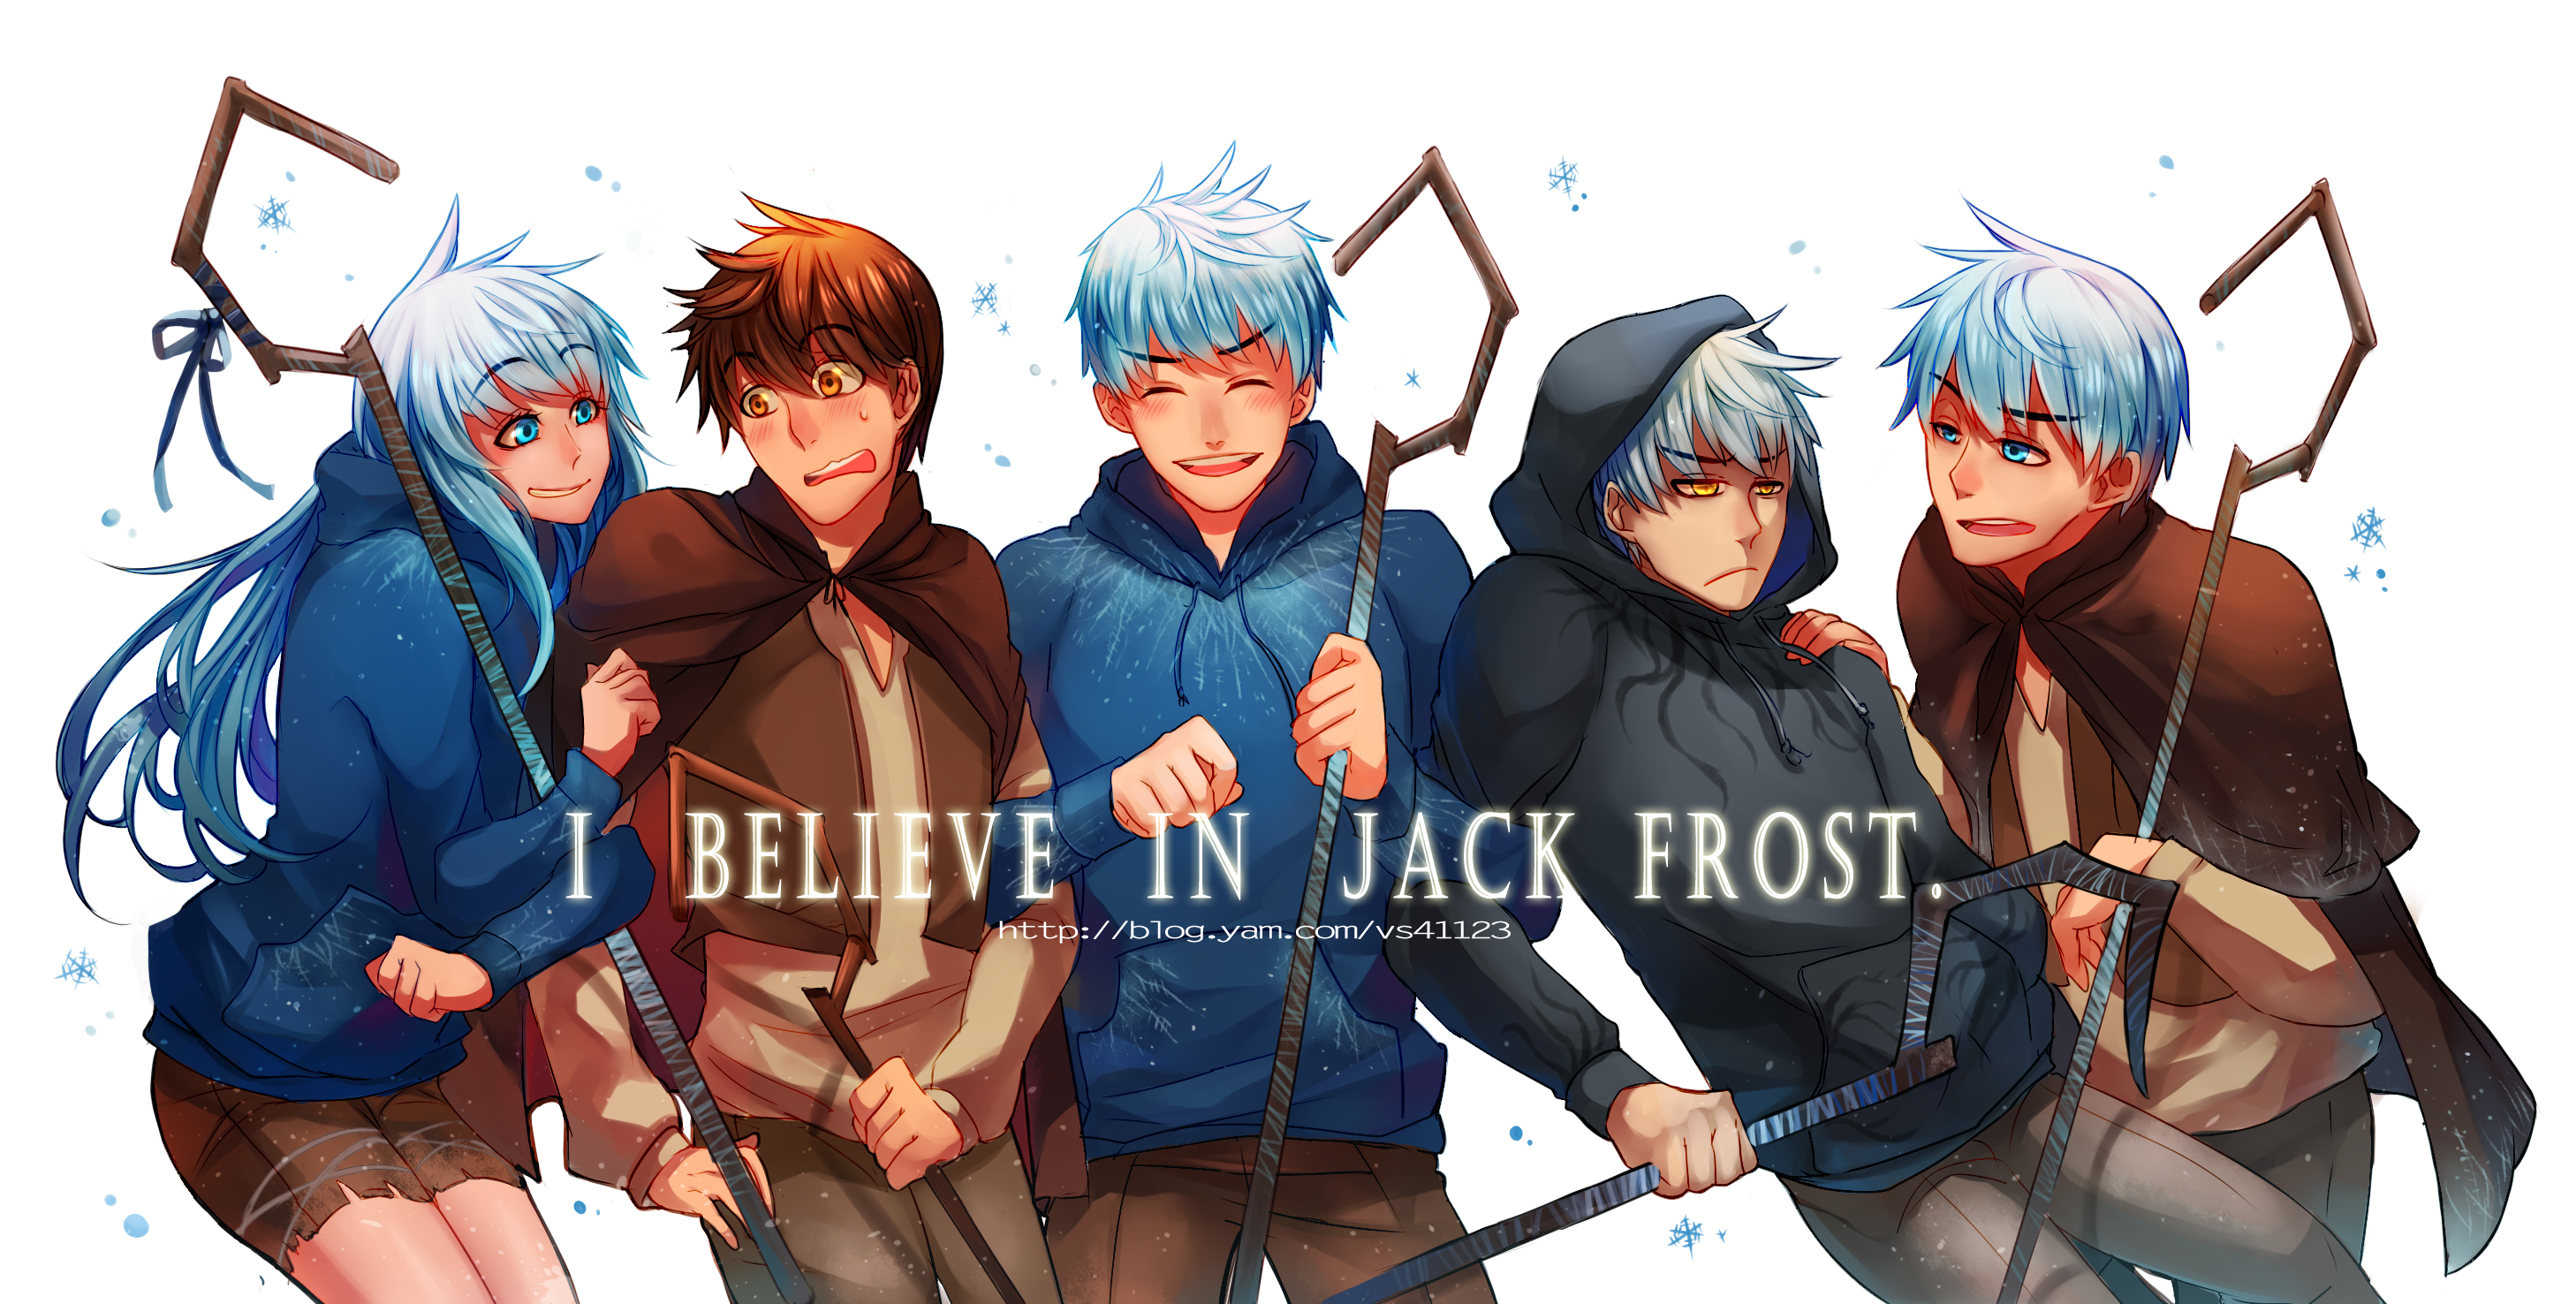 How To Draw Jack Frost, Step by Step, Drawing Guide, by Alley1 - DragoArt